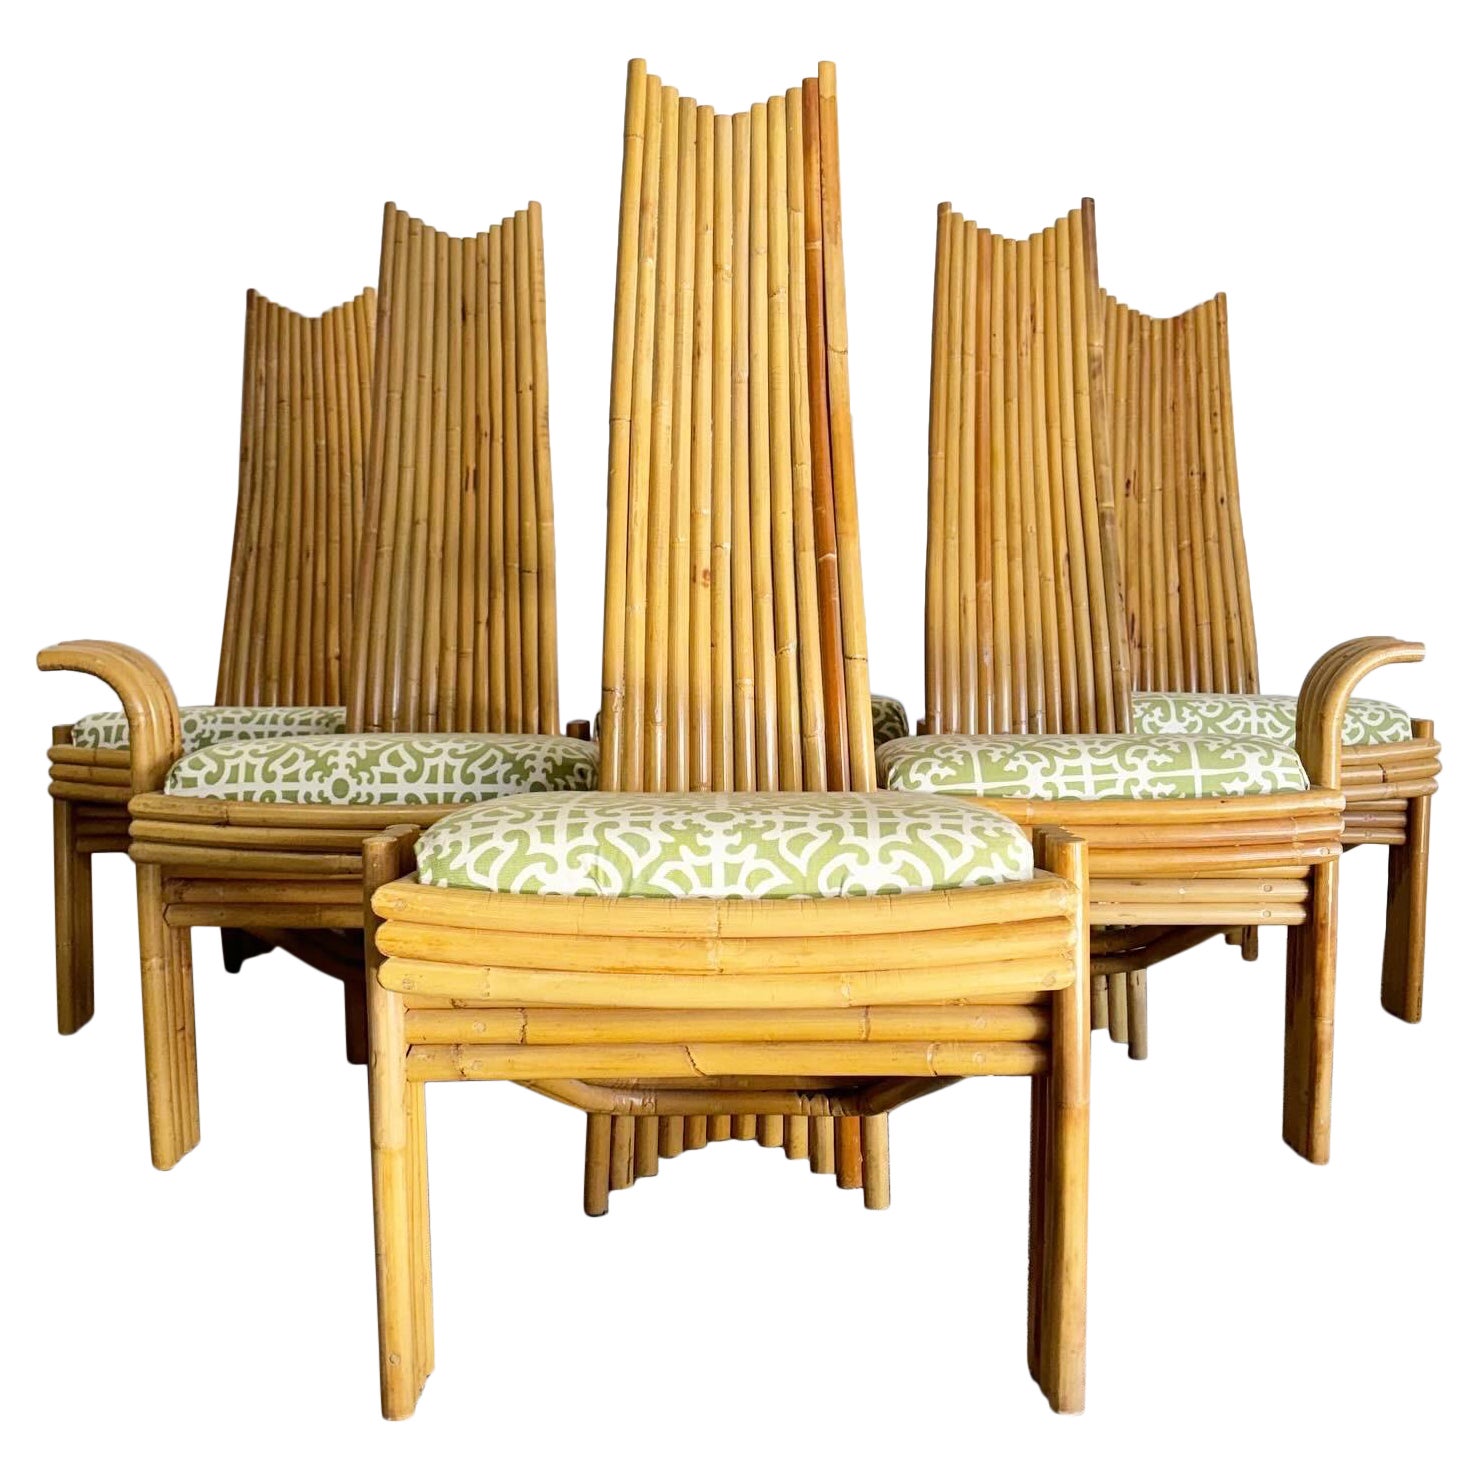 1970s Vintage Boho Chic High Back Bamboo Dining Chairs - Set of 6 For Sale